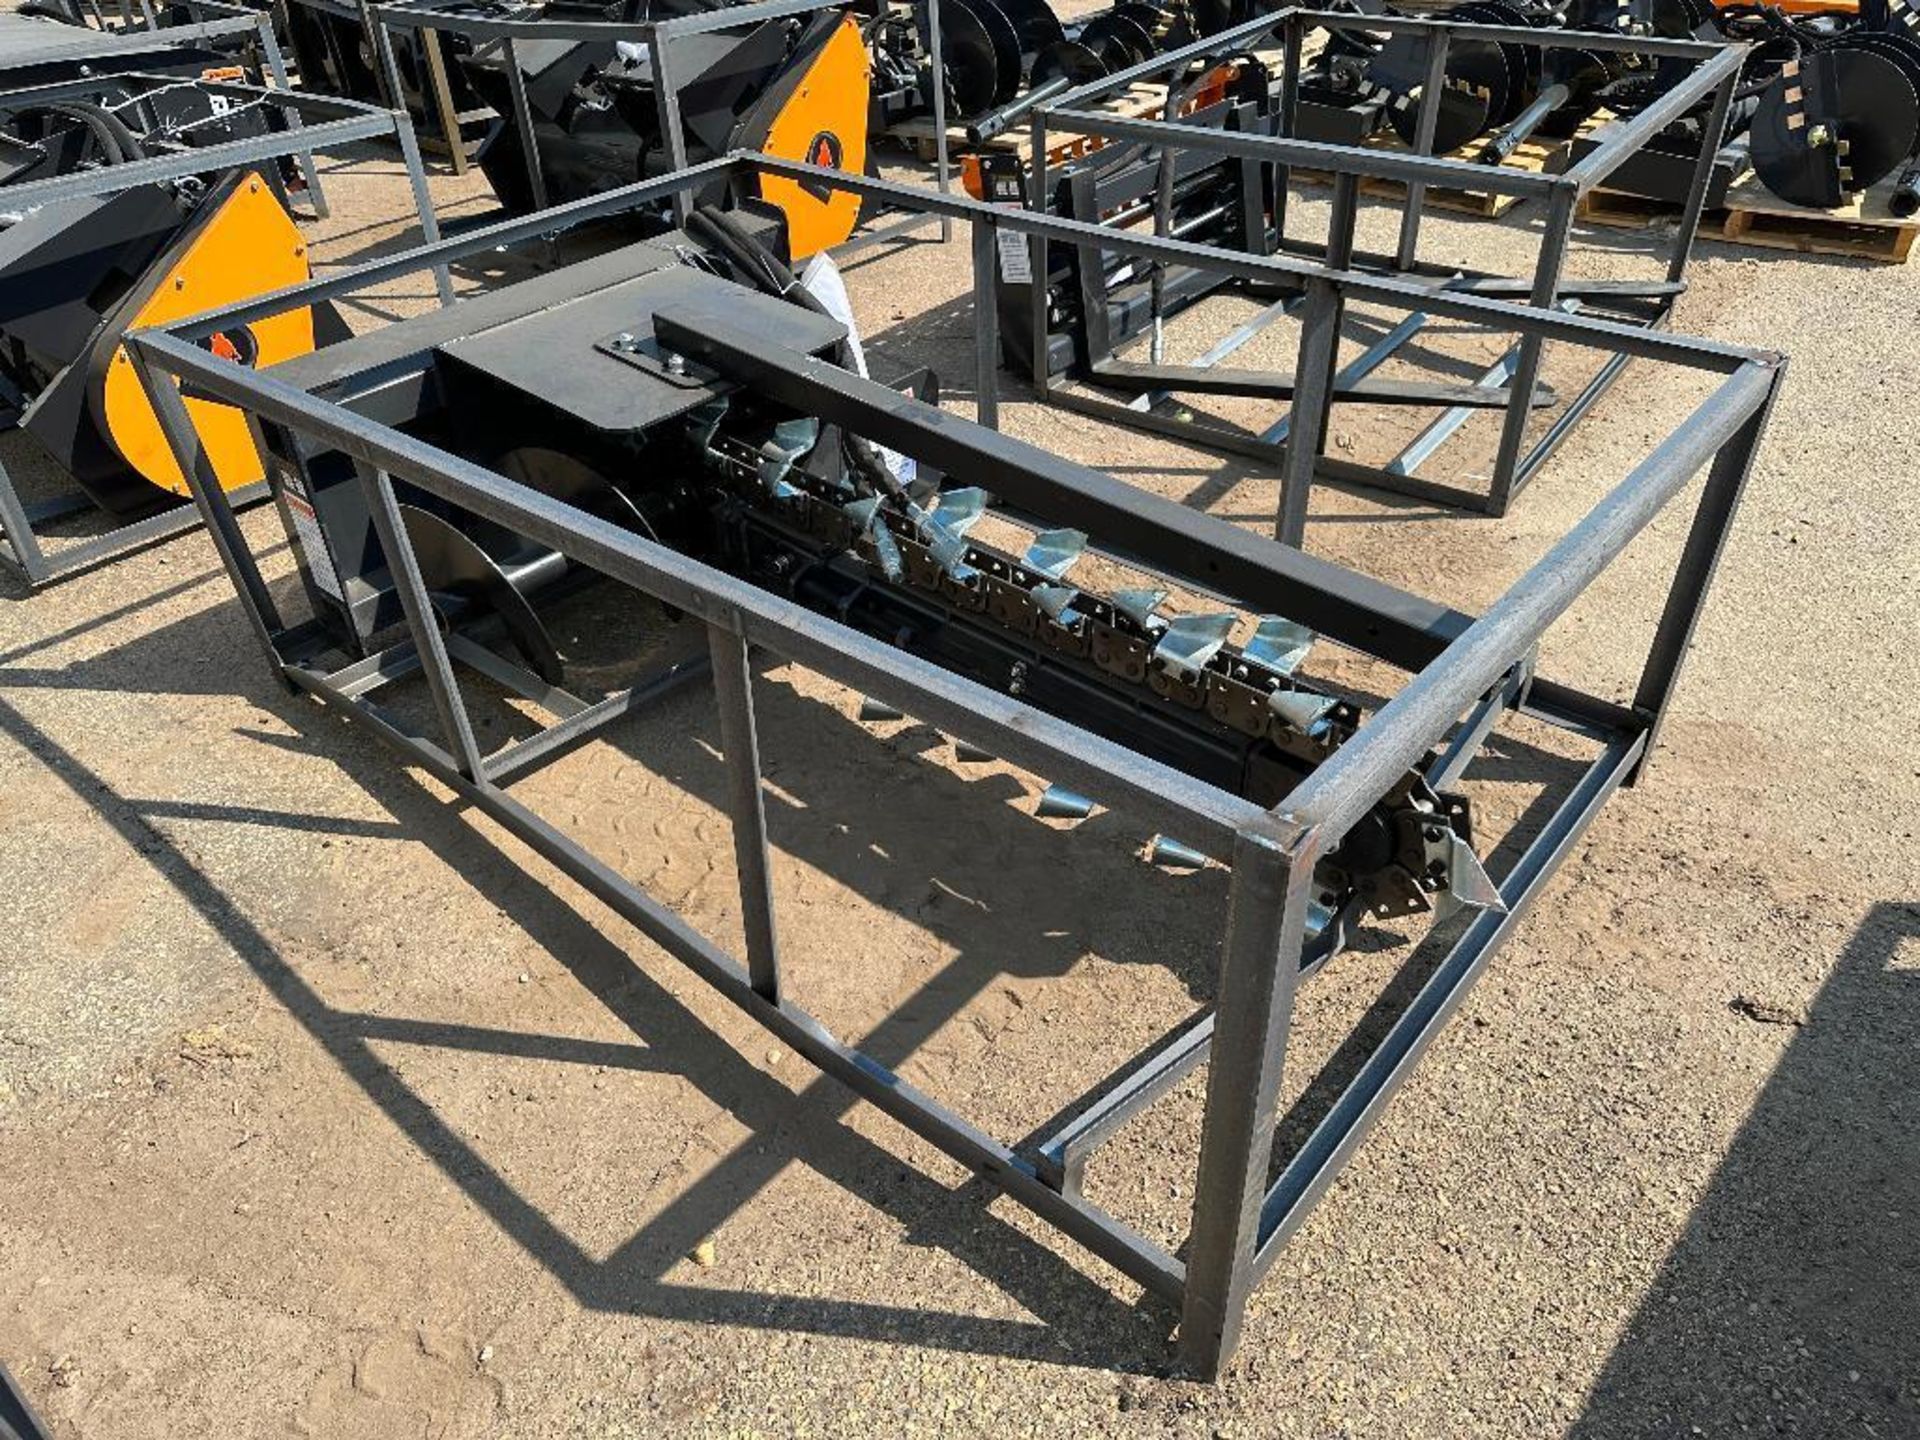 New 2023 Wolverine TCR-12-48H 48" Trencher Skid Steer Attachment - Image 2 of 3